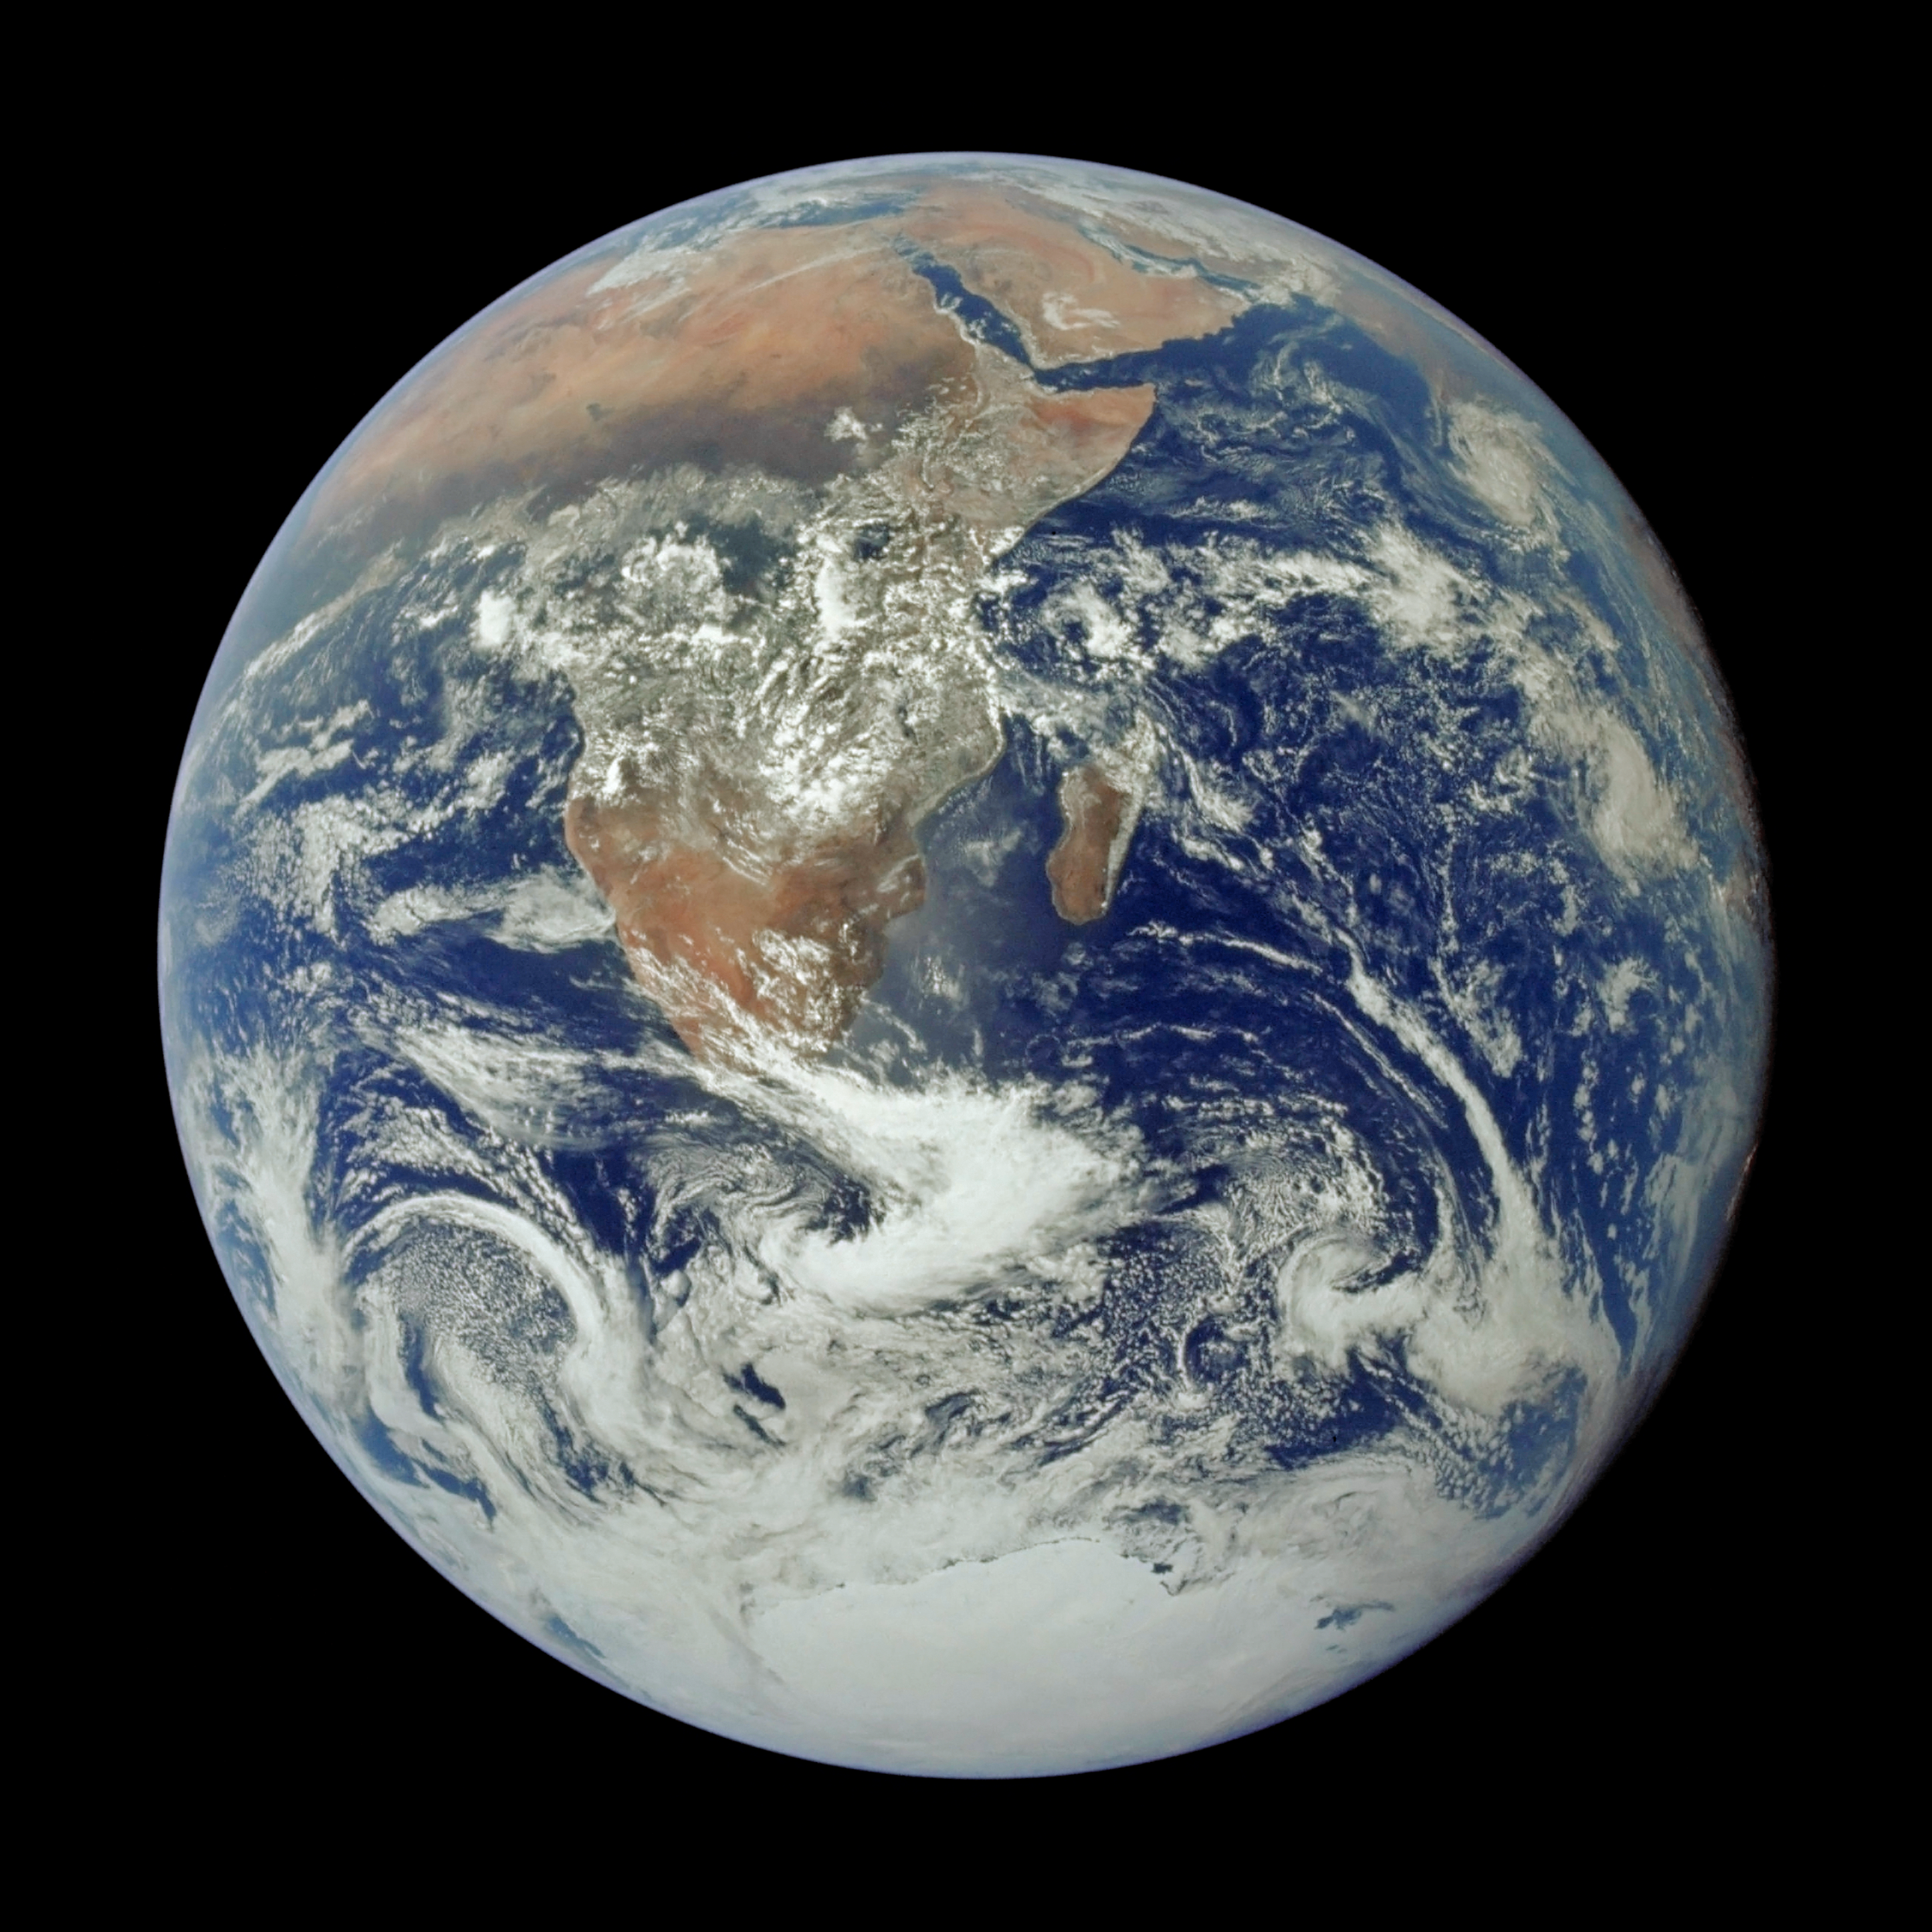 blue_marble_apollo_17_19721207.png